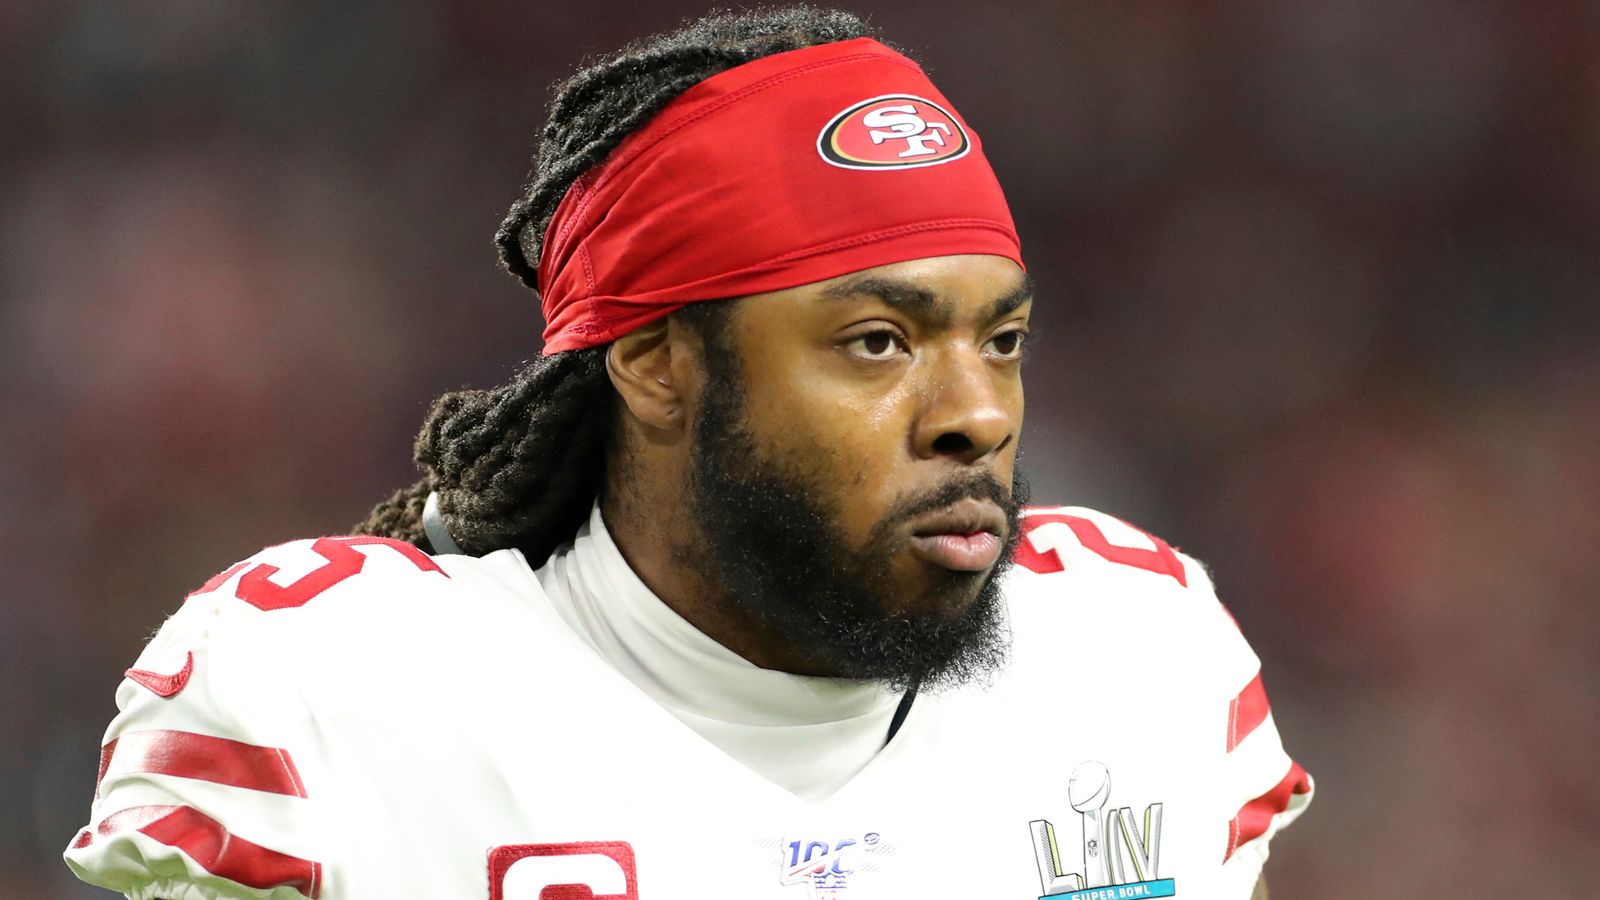 Richard Sherman: Former 49ers and Seahawks cornerback released without bail